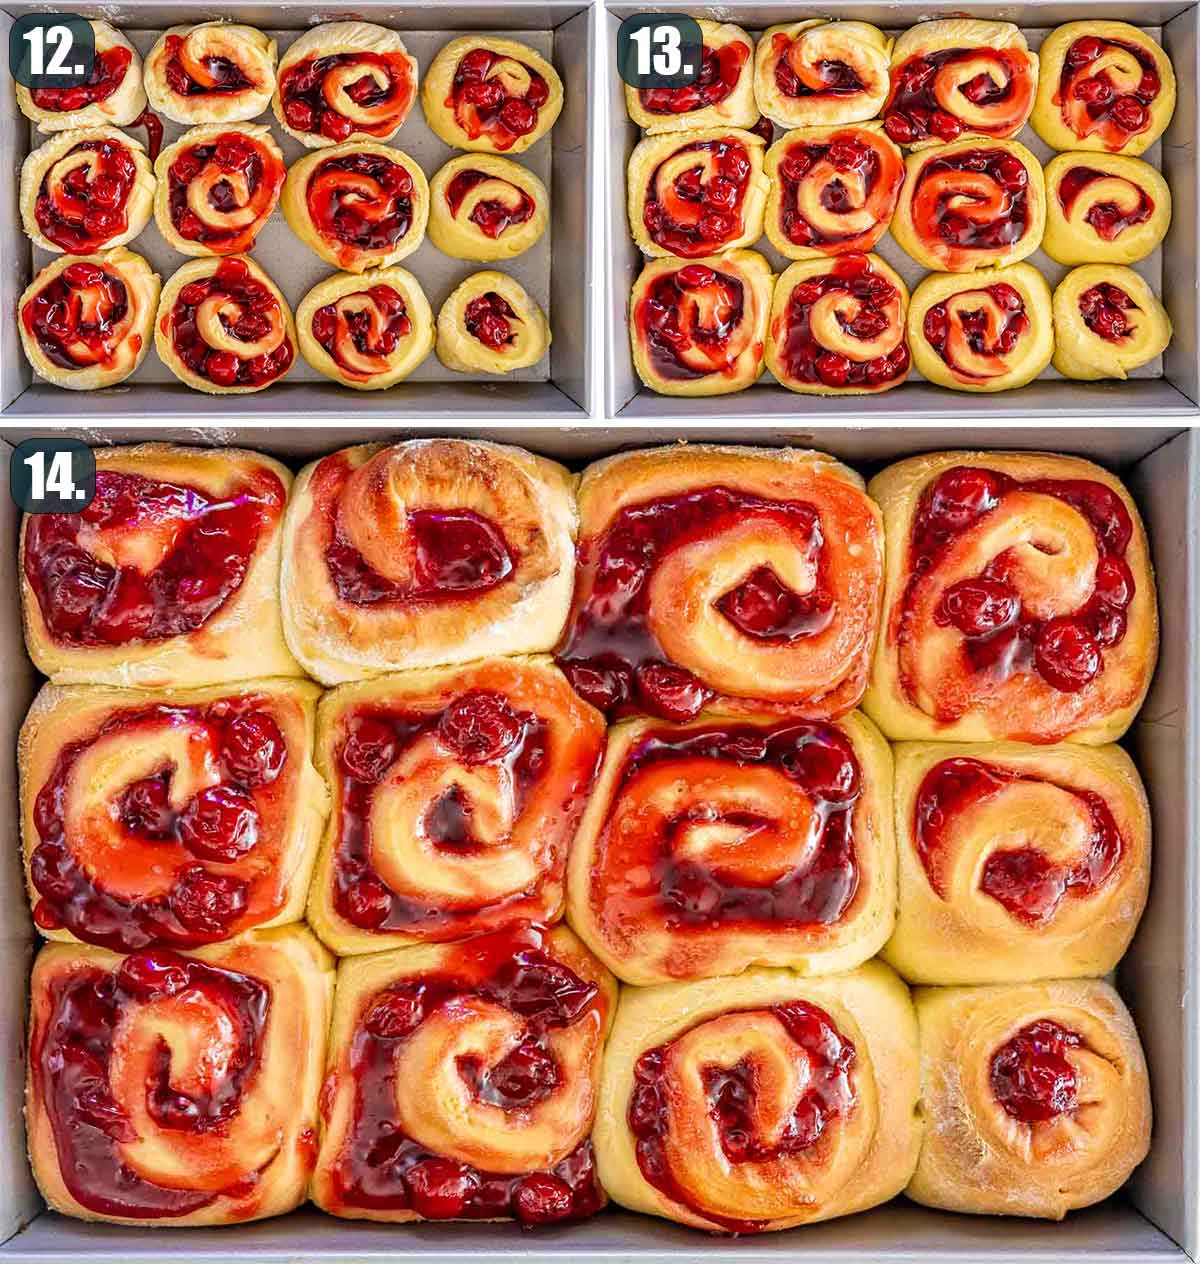 process shots showing cherry rolls before and after baking.